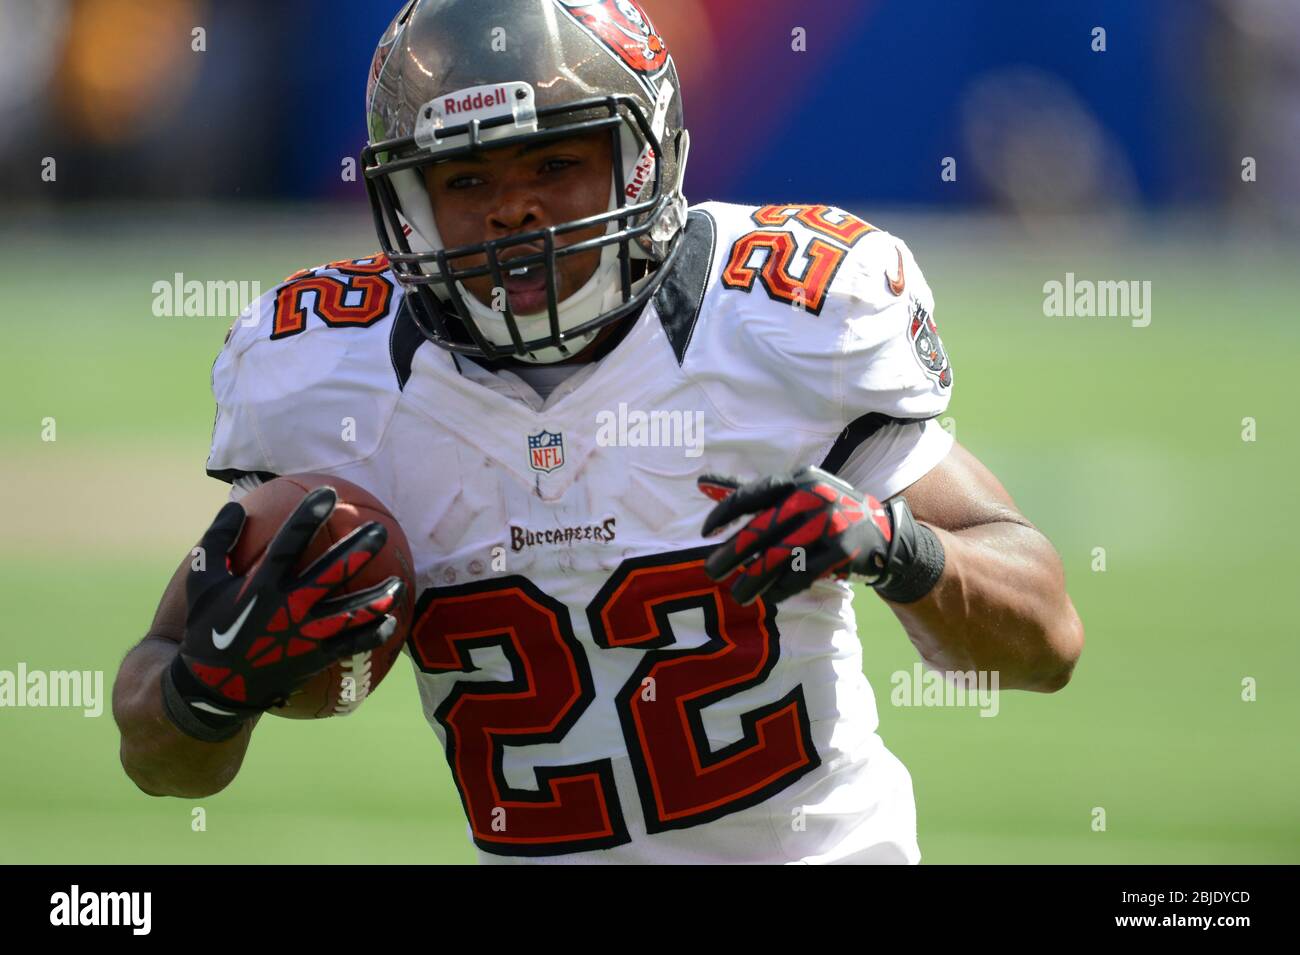 16 September 2012: Tampa Bay Buccaneers running back Doug Martin (22) carries the ball during a week 2 NFL NFC matchup between the Tampa Bay Buccaneer Stock Photo